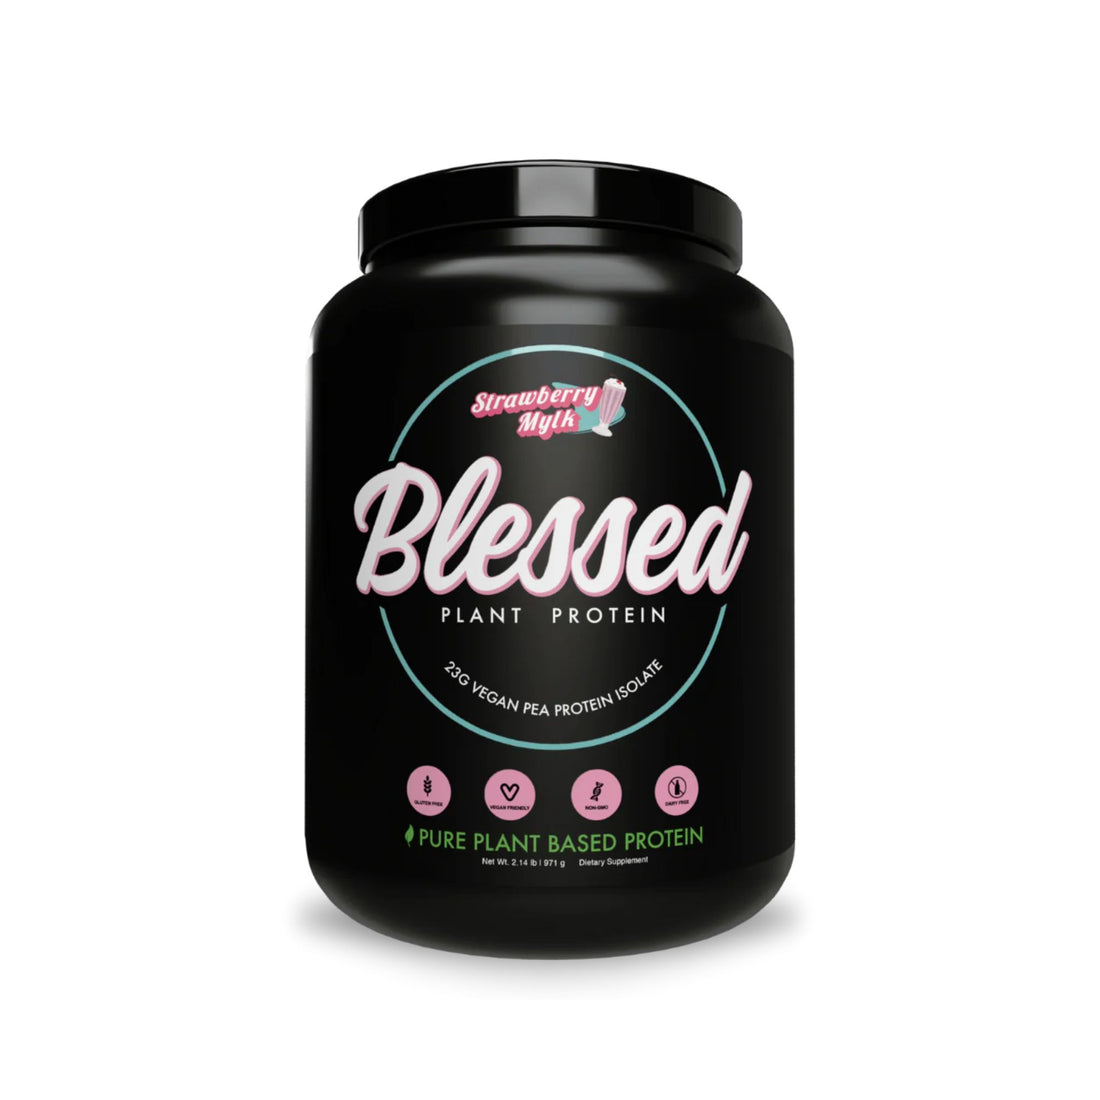 Blessed Protein - Strawberry Mylk Clearance